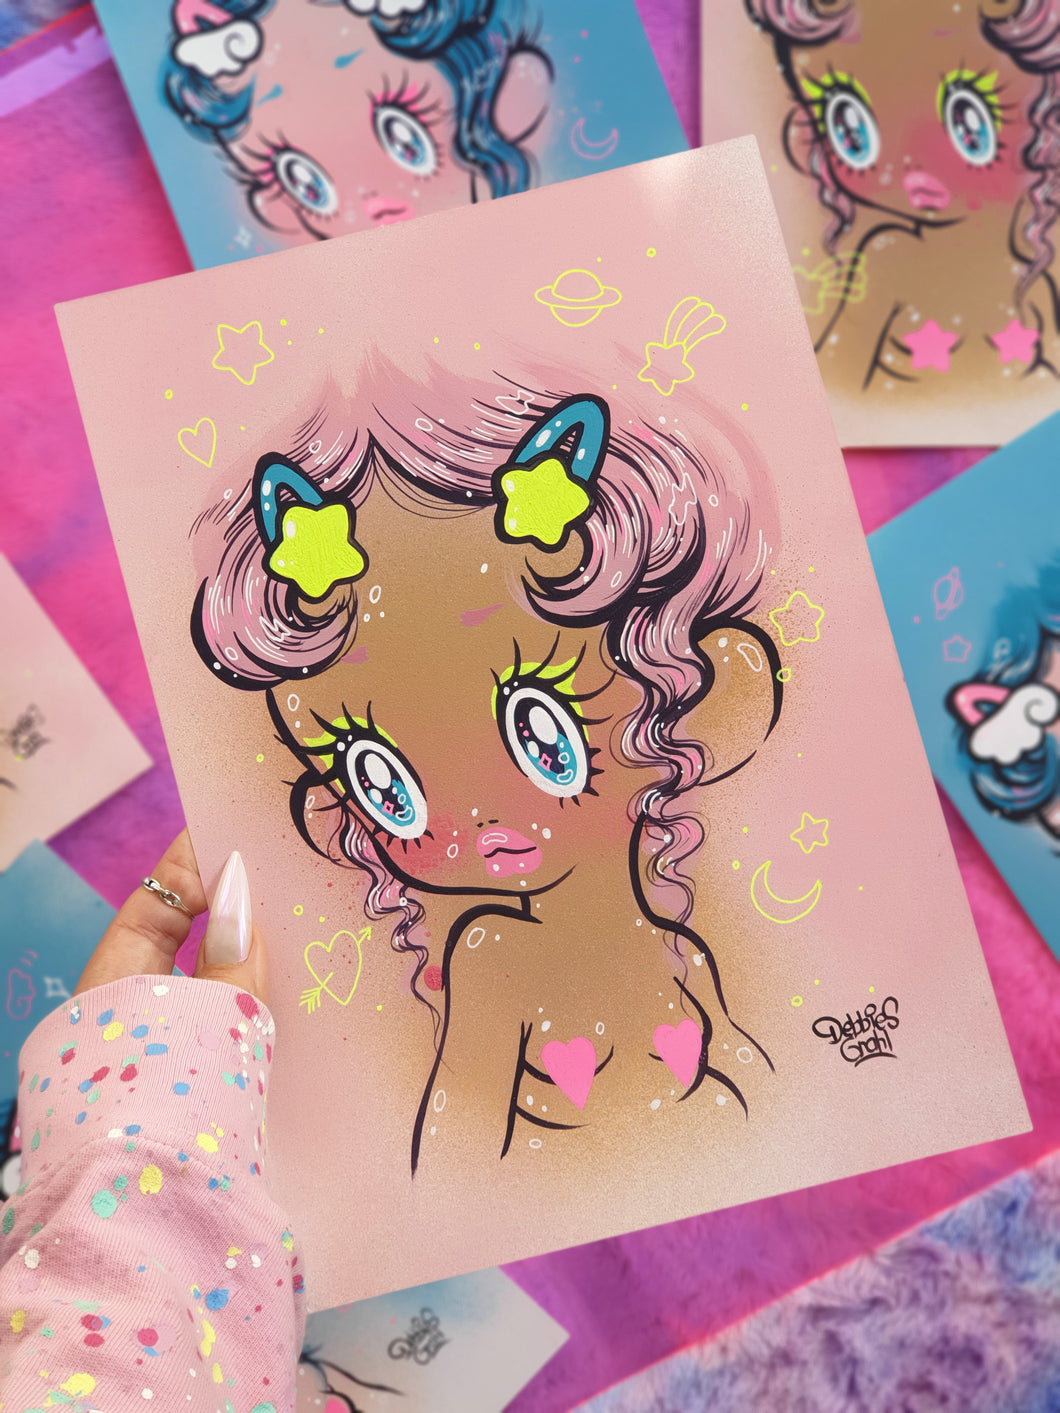 Whimsy Babes Original Paintings - Limited Series, Only 6 made!